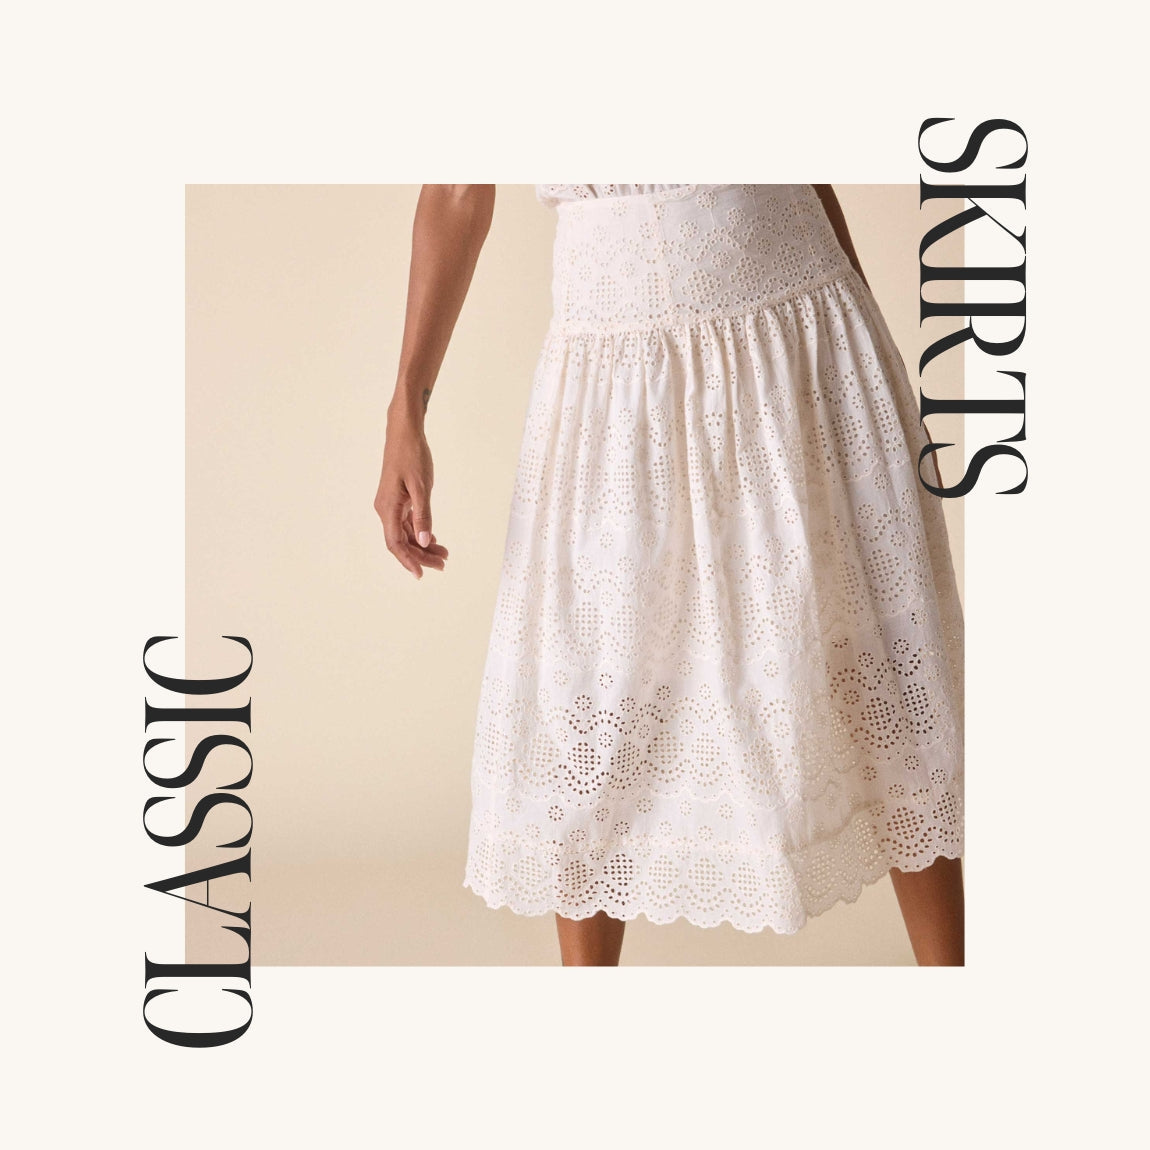 These Are the Skirts You'll Live in This Summer